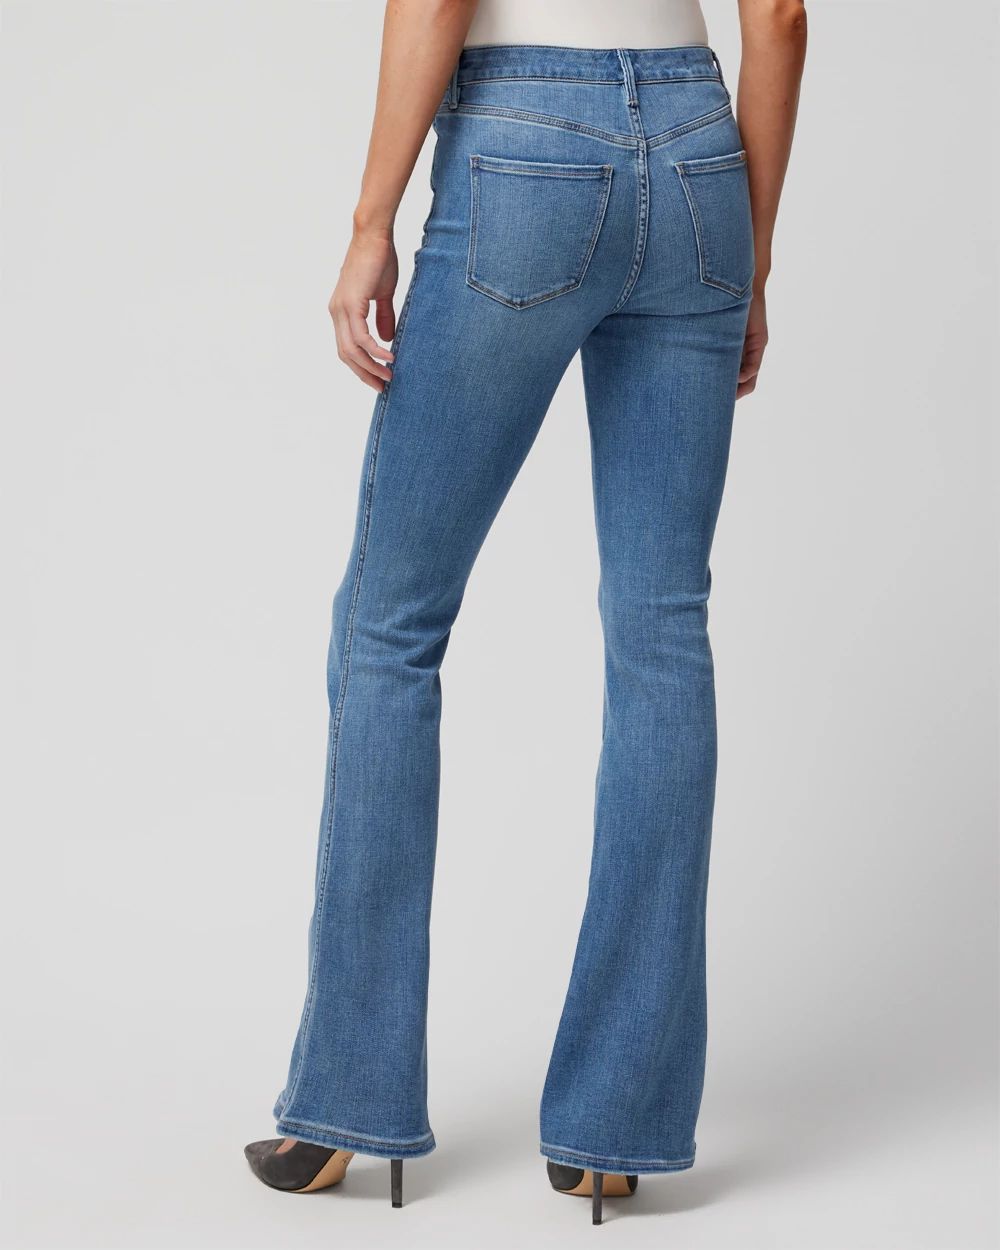 High-Rise Everyday Soft Denim  Skinny Flare Jeans click to view larger image.